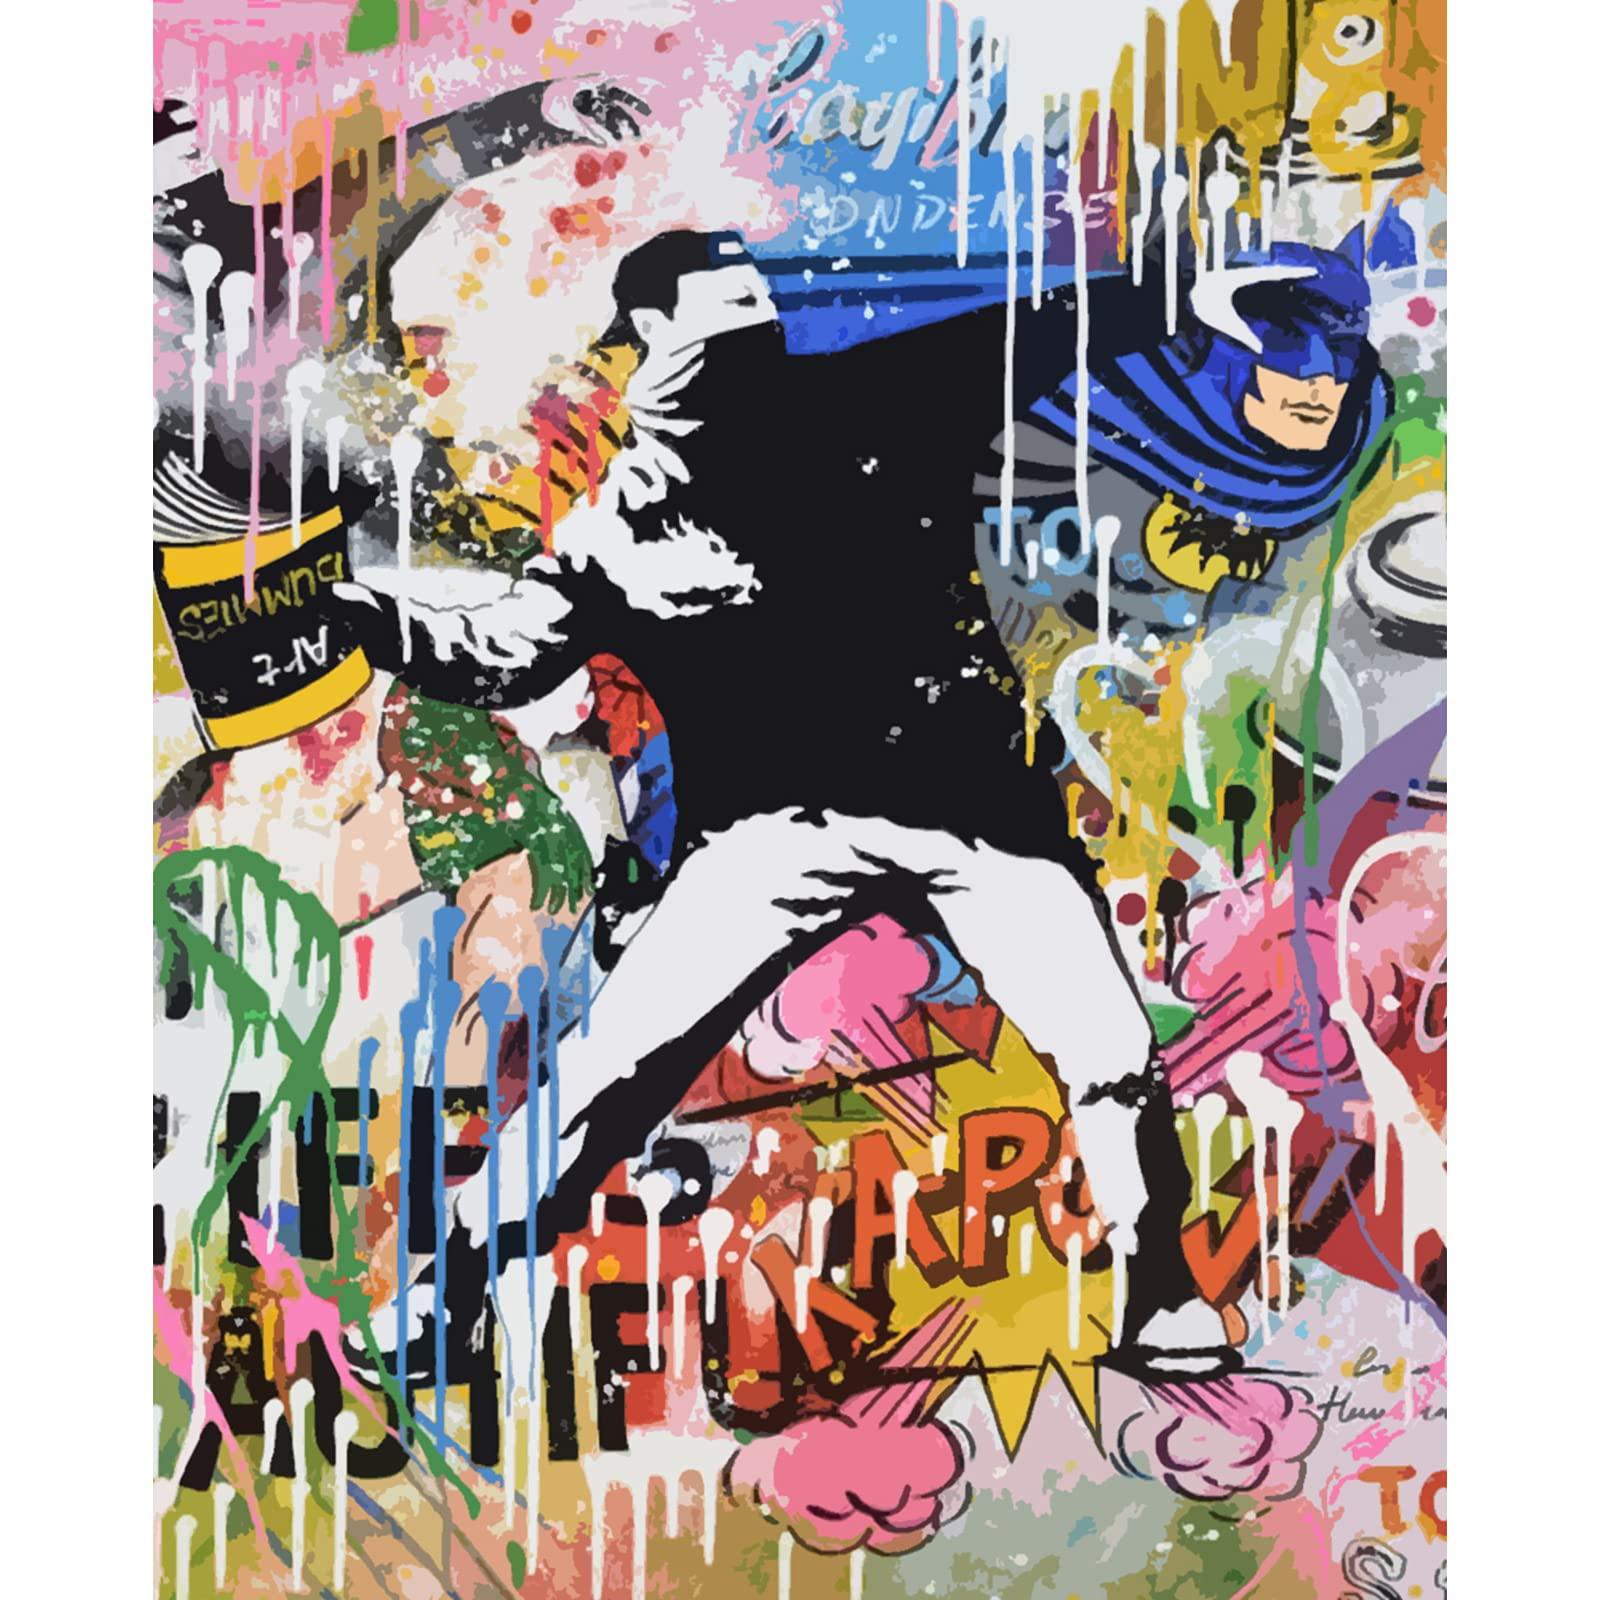 Tucocoo Banksy Modern Graffiti Oil Painting Paint by Number Kits 16 x 20 inch Canvas DIY Oil Painting for Kids Students Adults Beginner with Brushes and Acrylic Pigment(Without Frame)